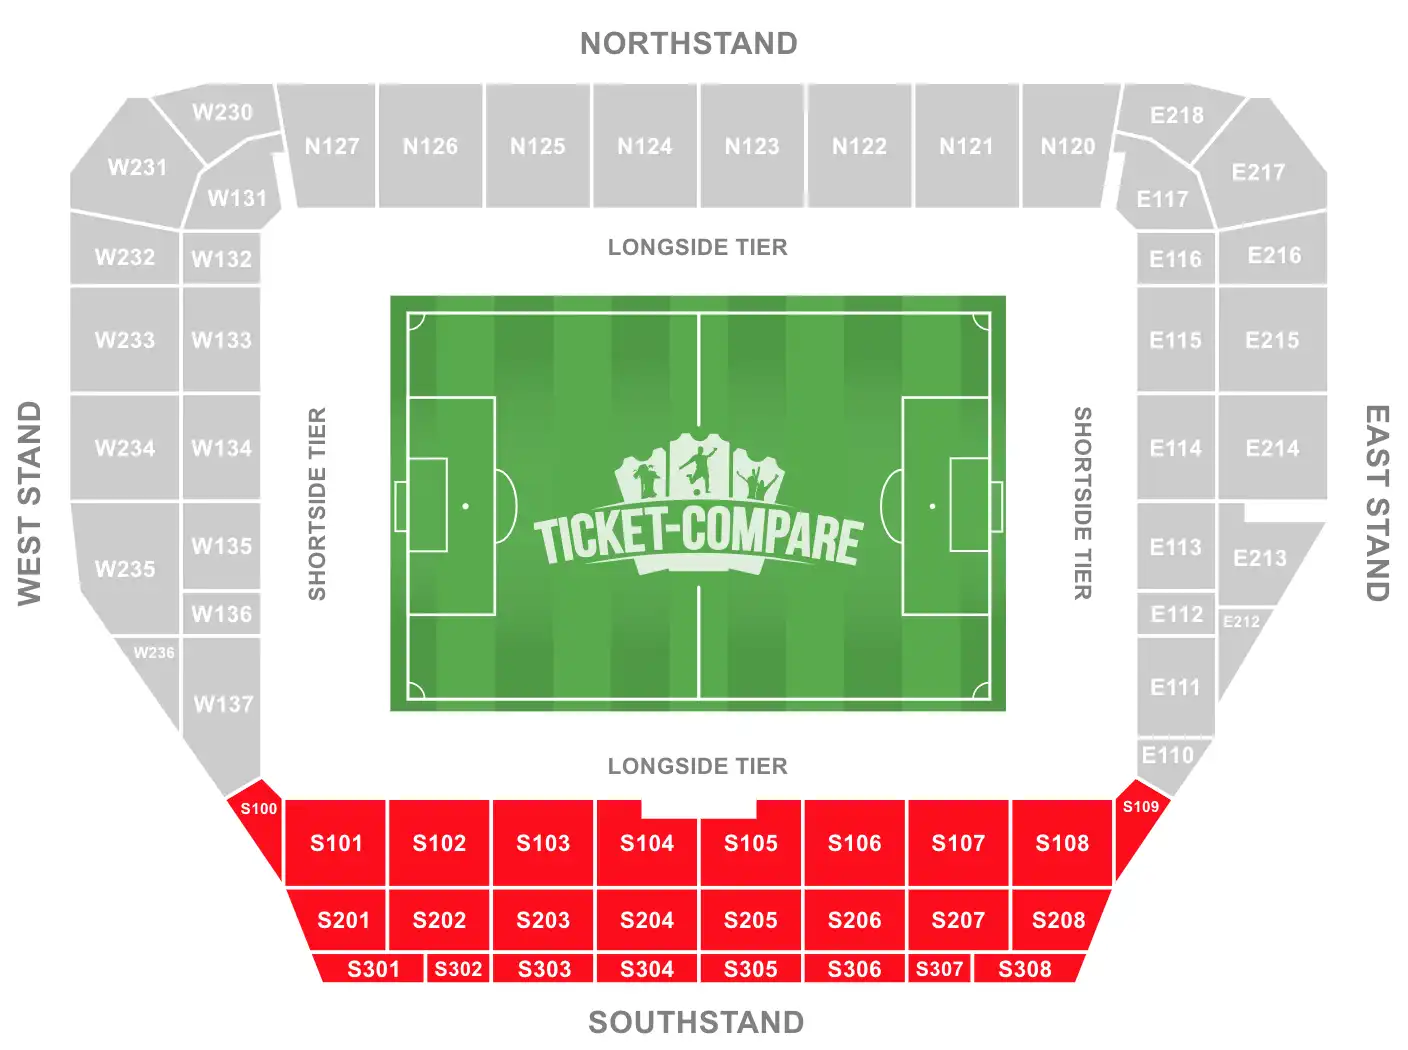 Community Stadium Seating Plan with highligted the South stand